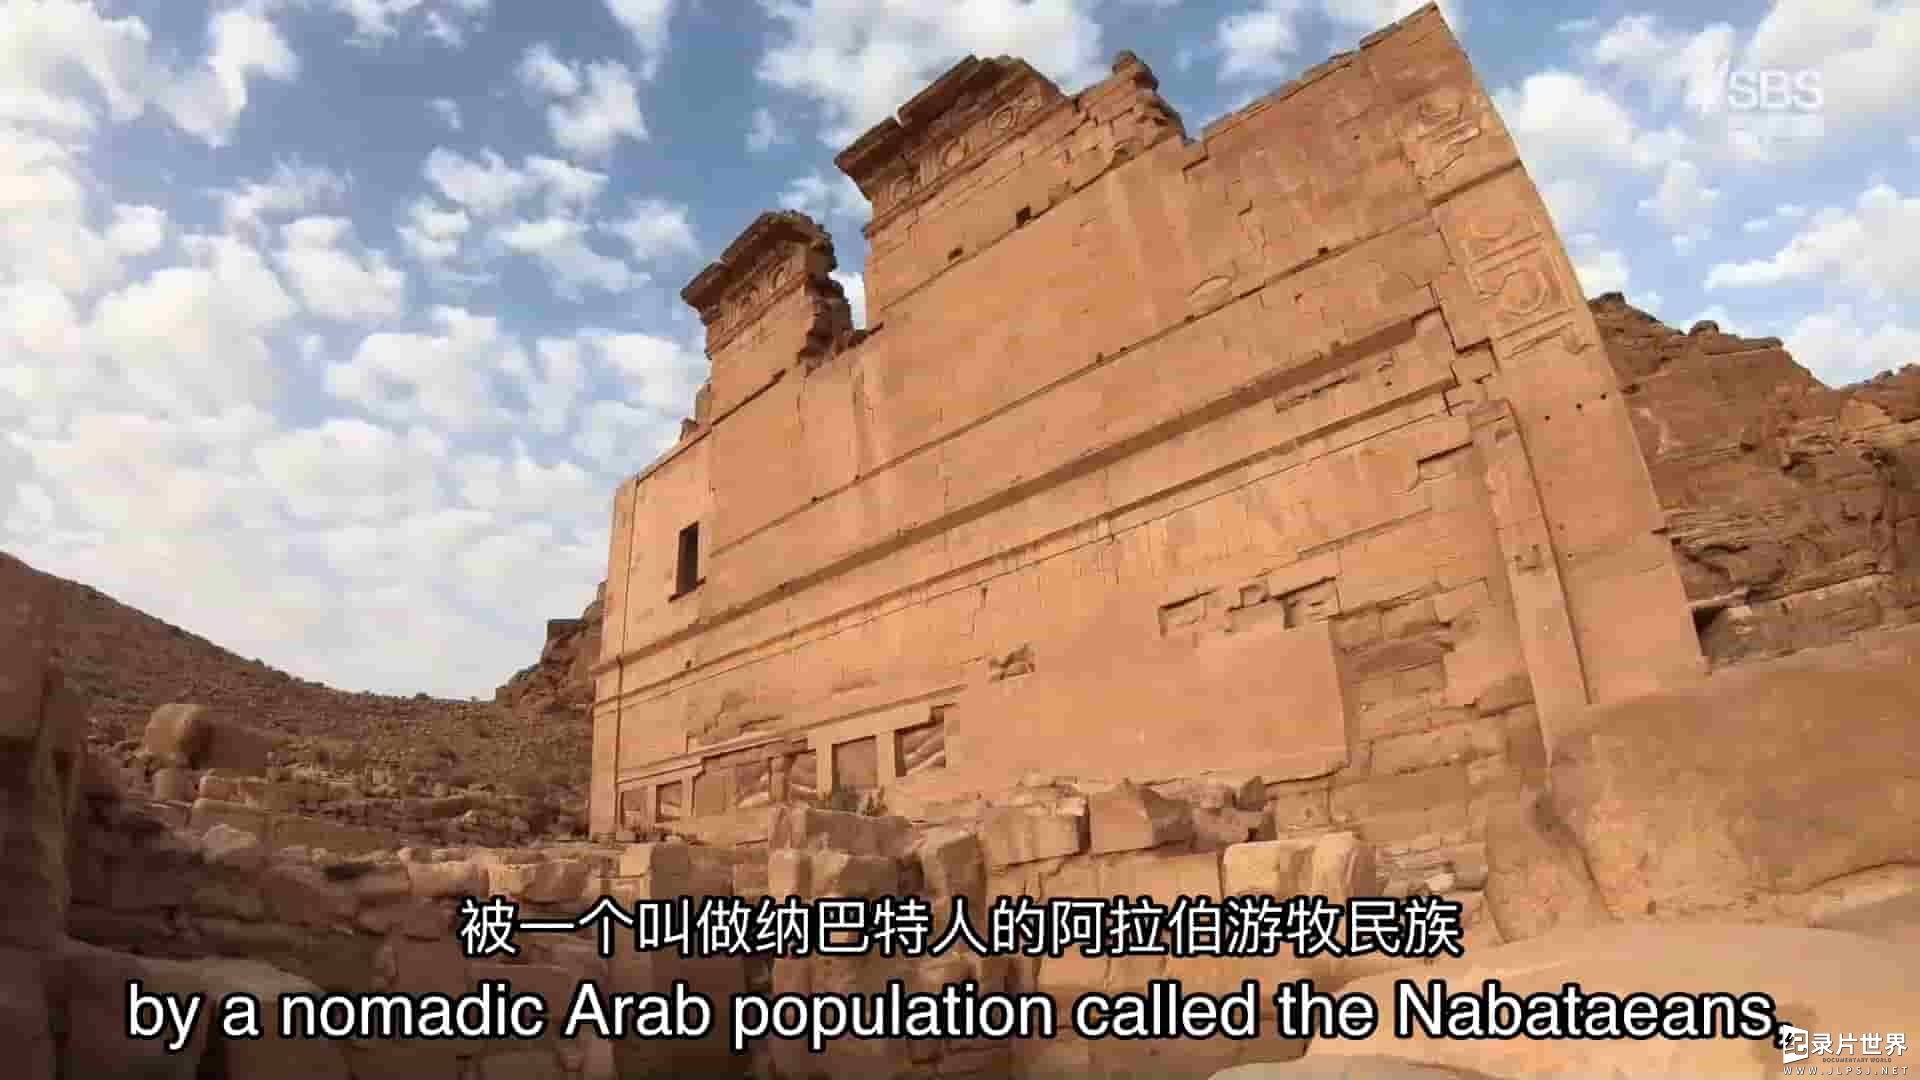 SBS纪录片《古代超级建筑 Ancient Superstructures 2020》第1季全4集